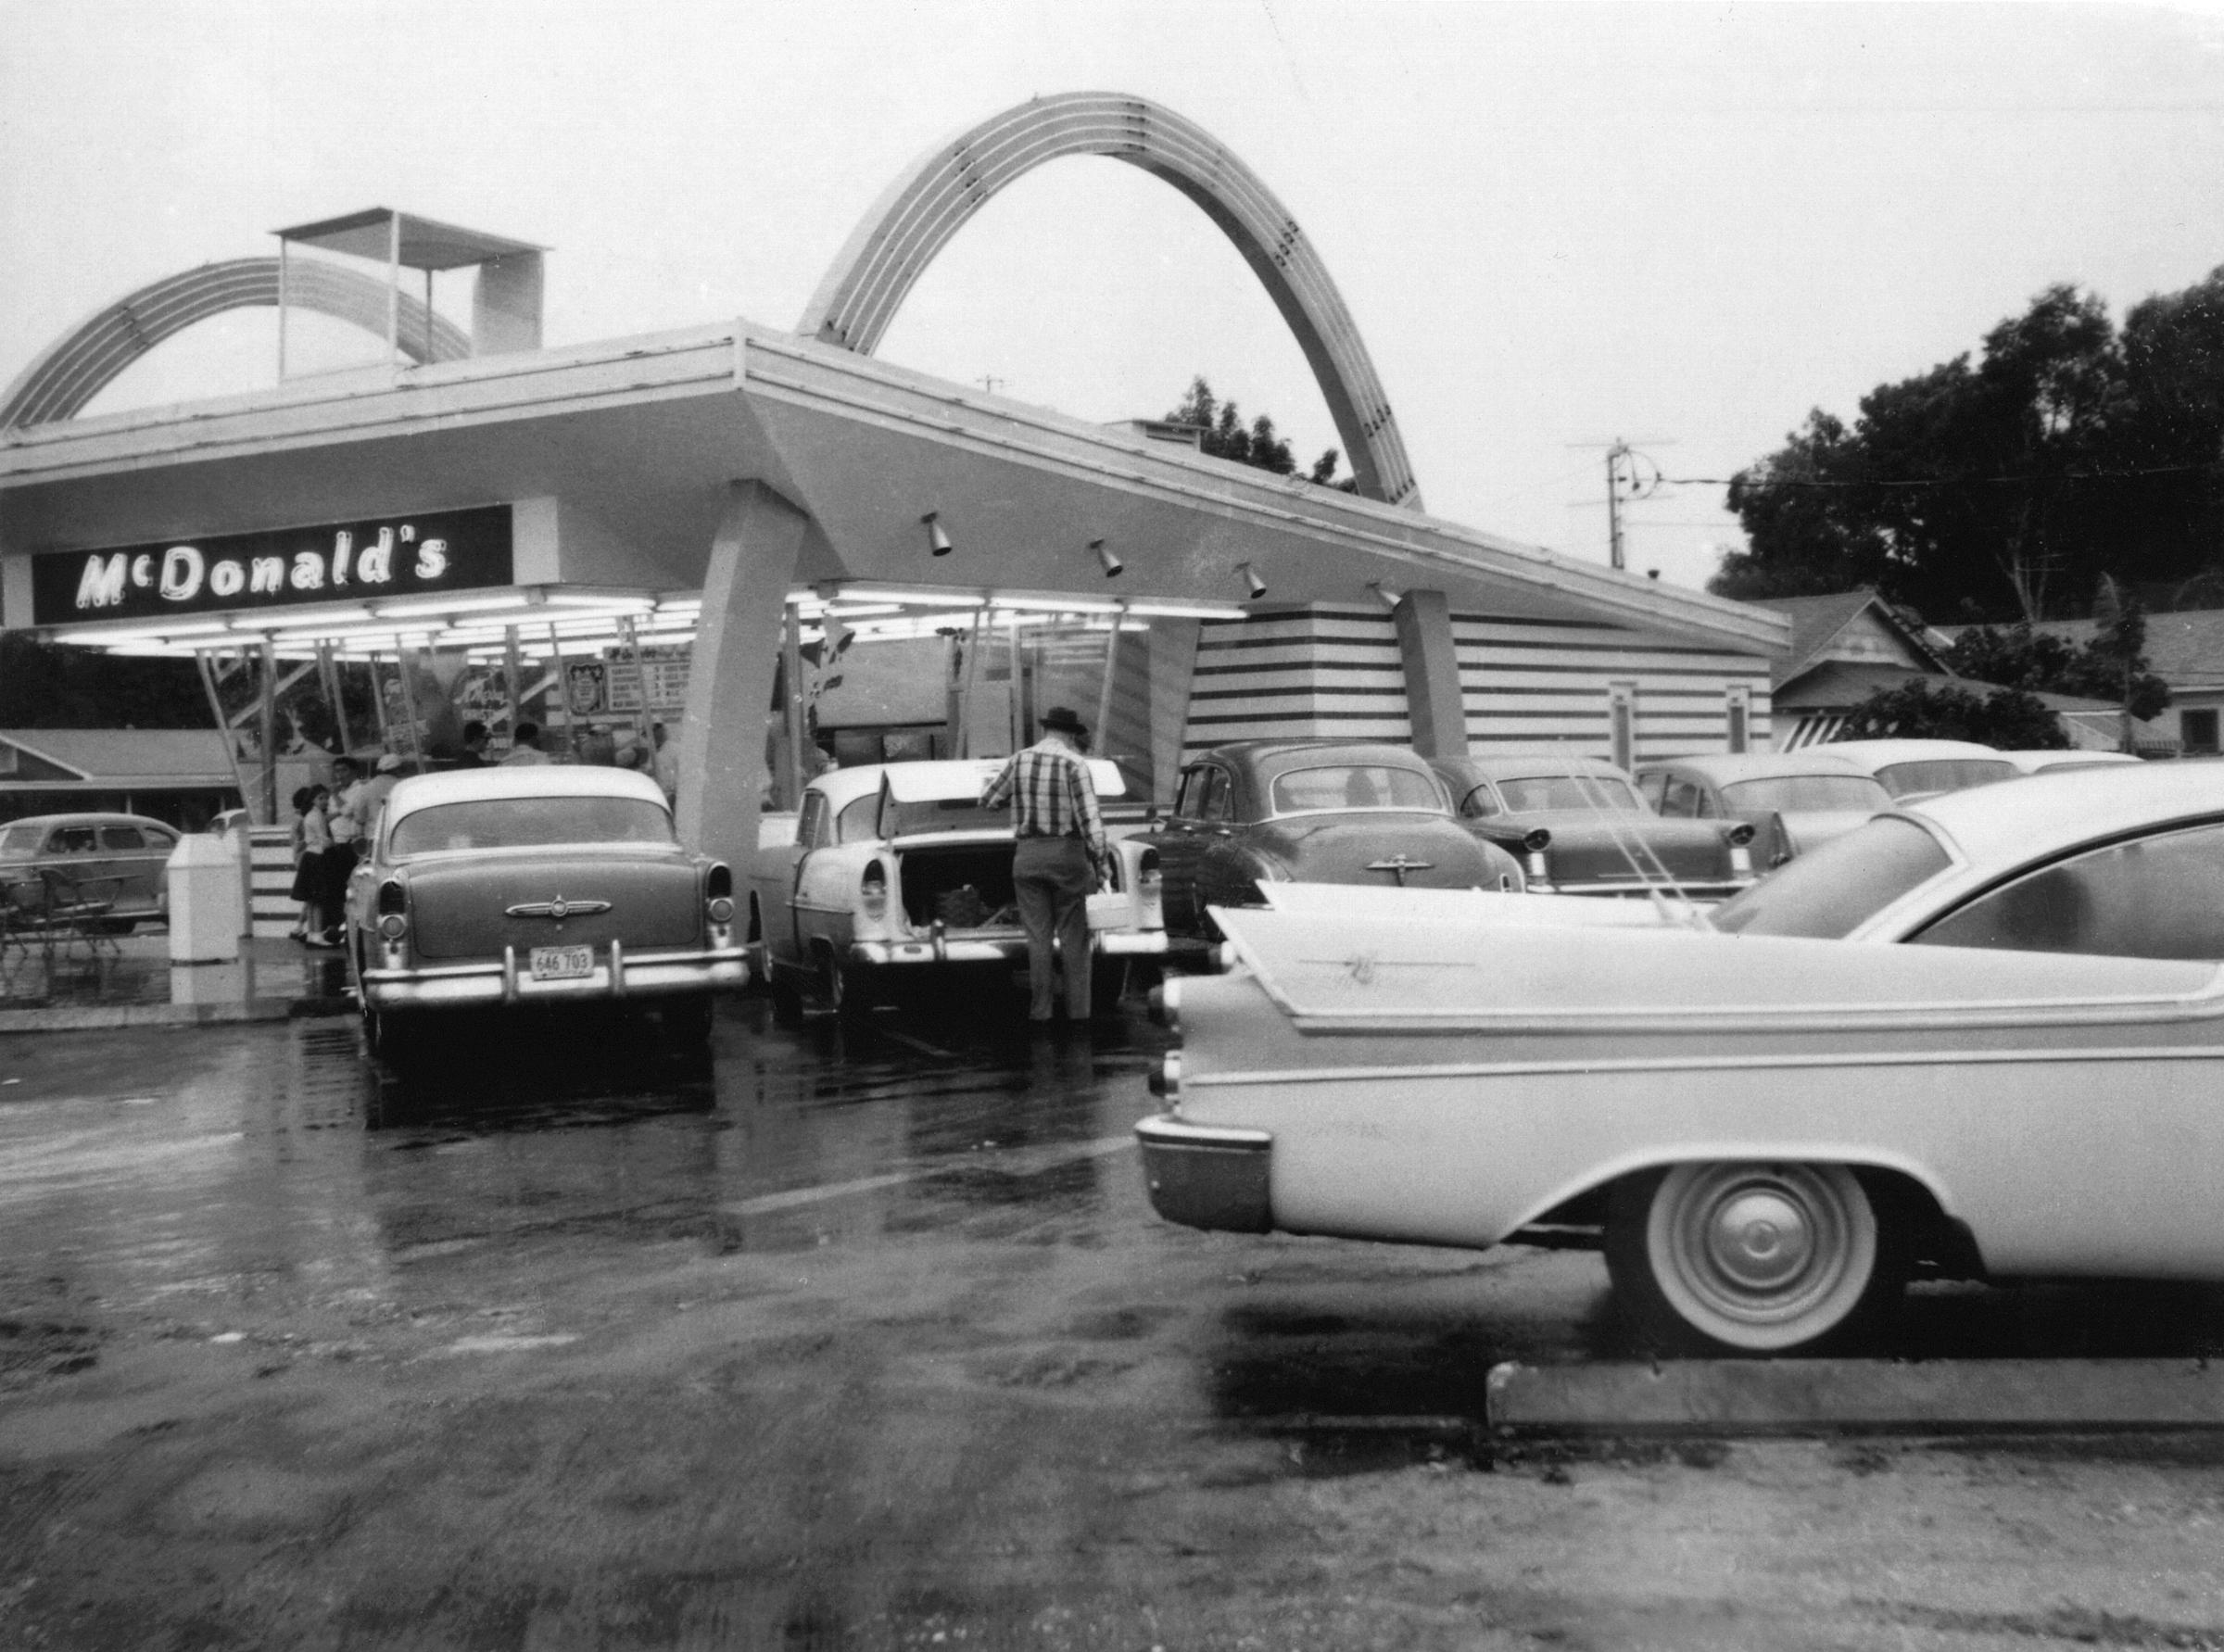 The Sixth Florida McDonald's Location Opens in St. Petersburg in 1958.